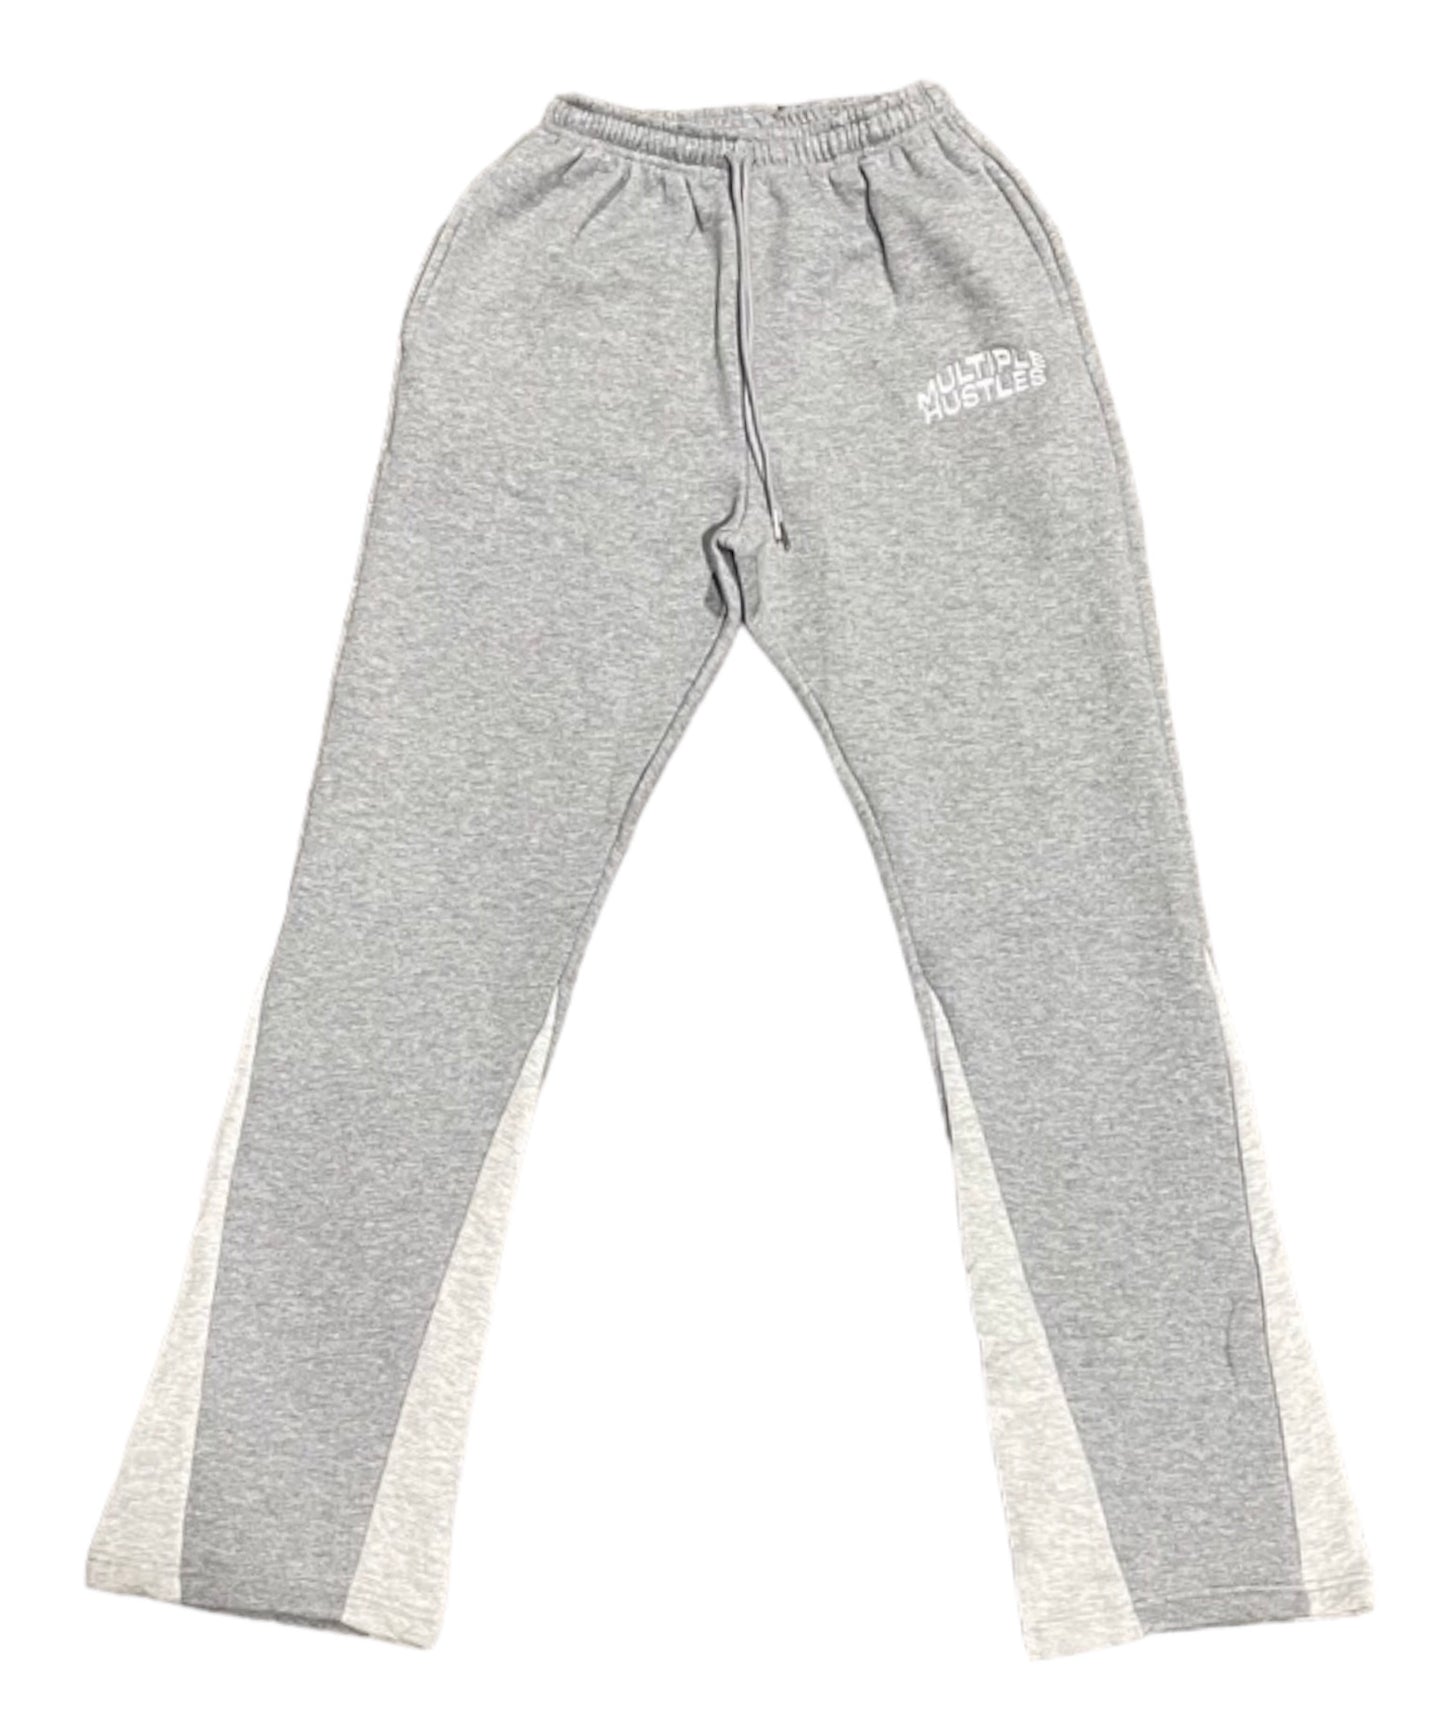 Grey/White Flare Joggers